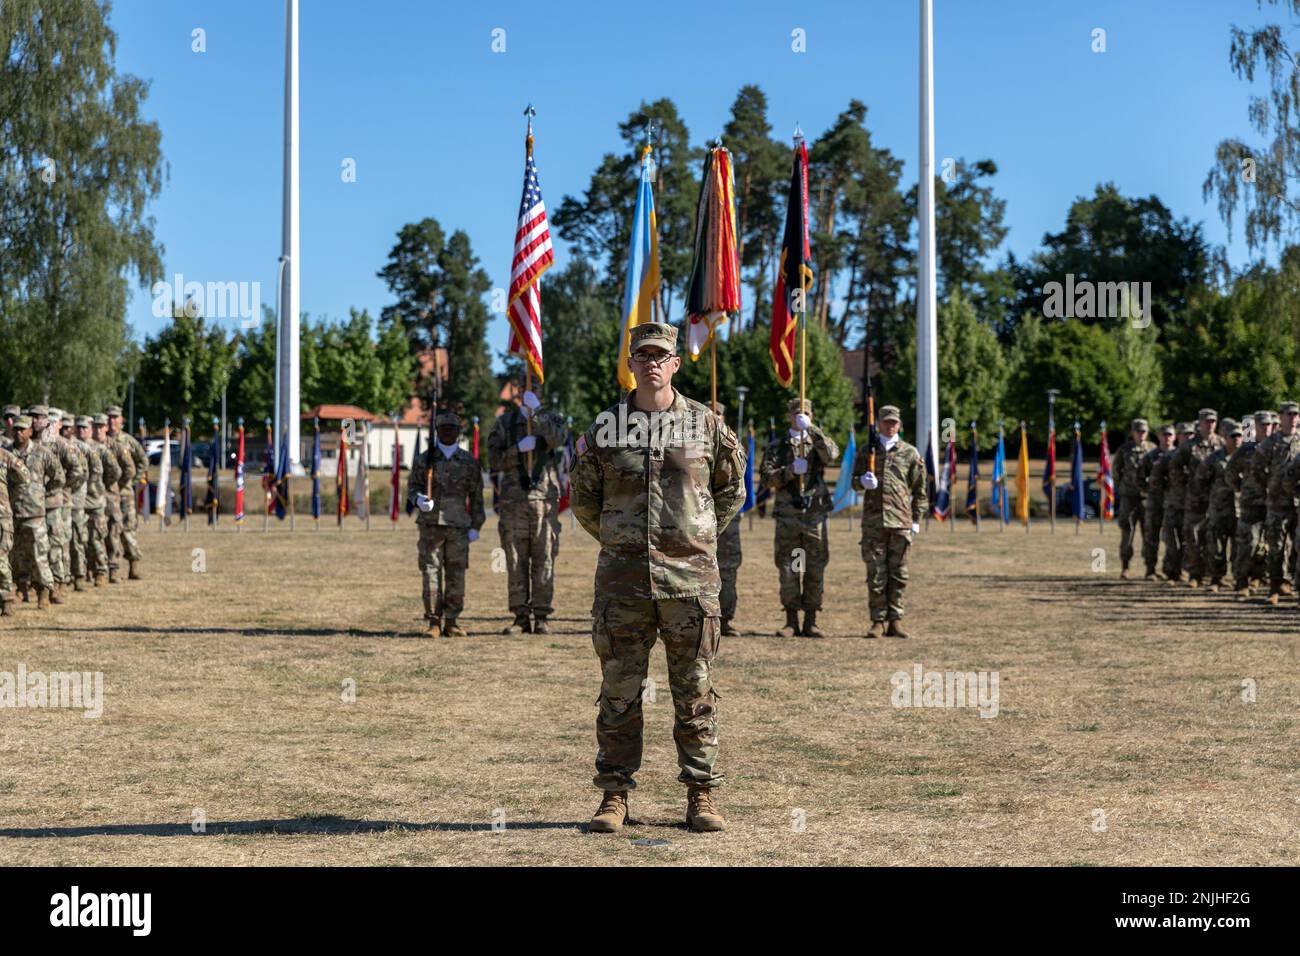 U.S. Army Lt. Col. Todd Hopkins, chief of staff of Task Force Gator, 53rd Infantry Brigade Combat Team, Florida Army National Guard stand in front of a color guard and formation of Soldiers from two task forces during the Joint Multinational Training Group-Ukraine Transfer of Authority ceremony in Grafenwoehr, Germany, August 8, 2022. Soldiers from Task Force Orion, 27th Infantry Brigade Combat Team, New York Army National Guard assumed the JMTG-U mission from Task Force Gator, and will ensure the combat effectiveness of Ukrainian military personnel training on systems and equipment issued und Stock Photo